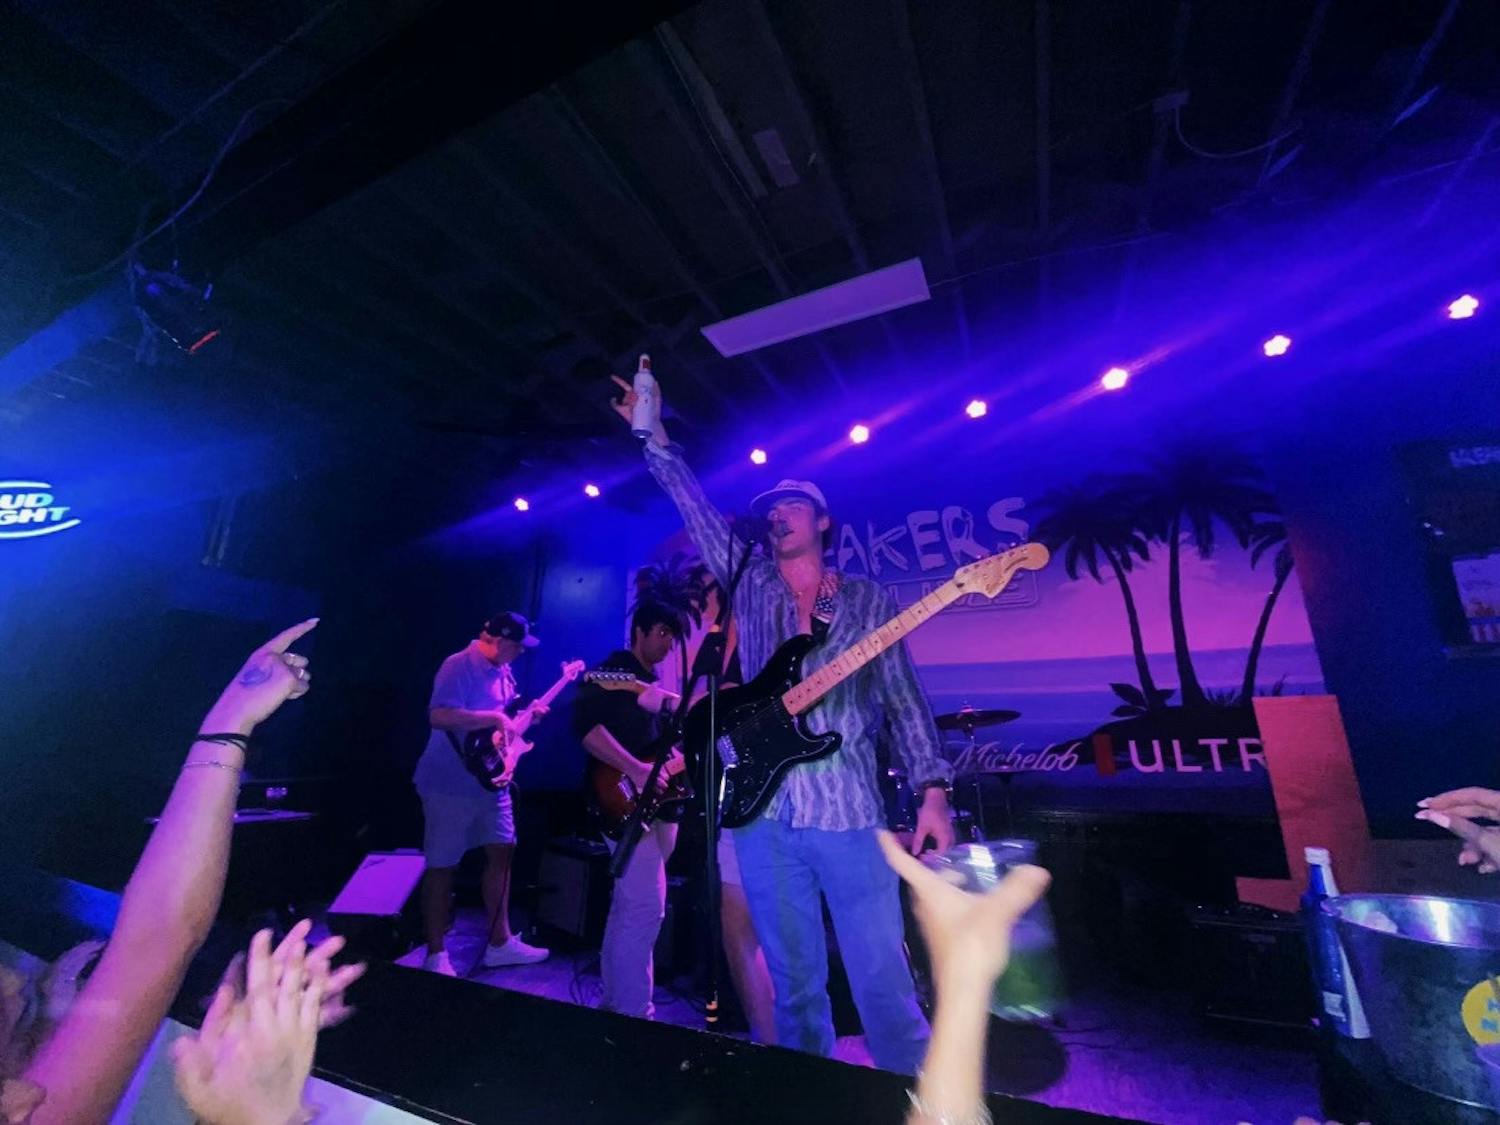 Lead vocalist Jack Brecher raises his drink to a crowd as the band prepares for its next song at Breaker’s Live in Five Points on March 26, 2023. The group has been performing live at venues since February 2023.&nbsp;